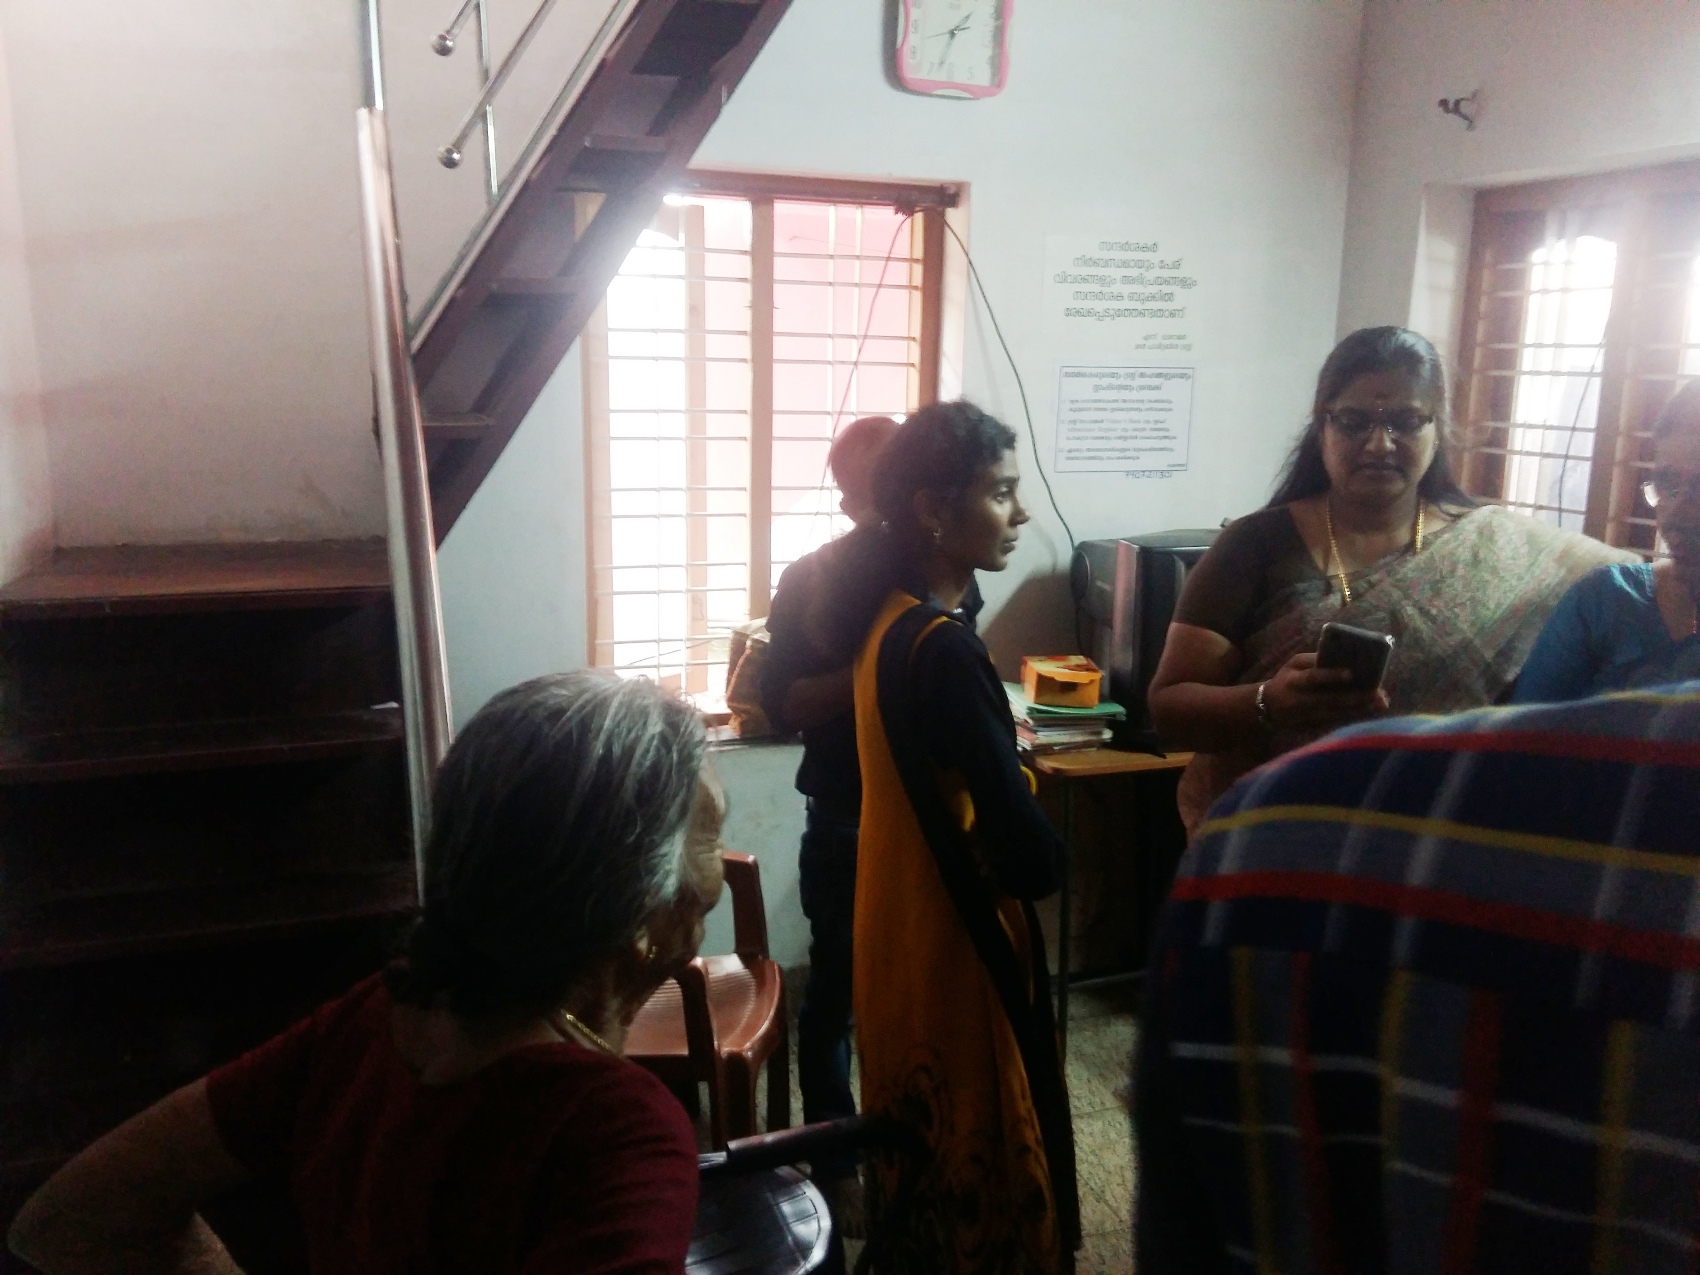 One Day Meal to Mother care home Alathur